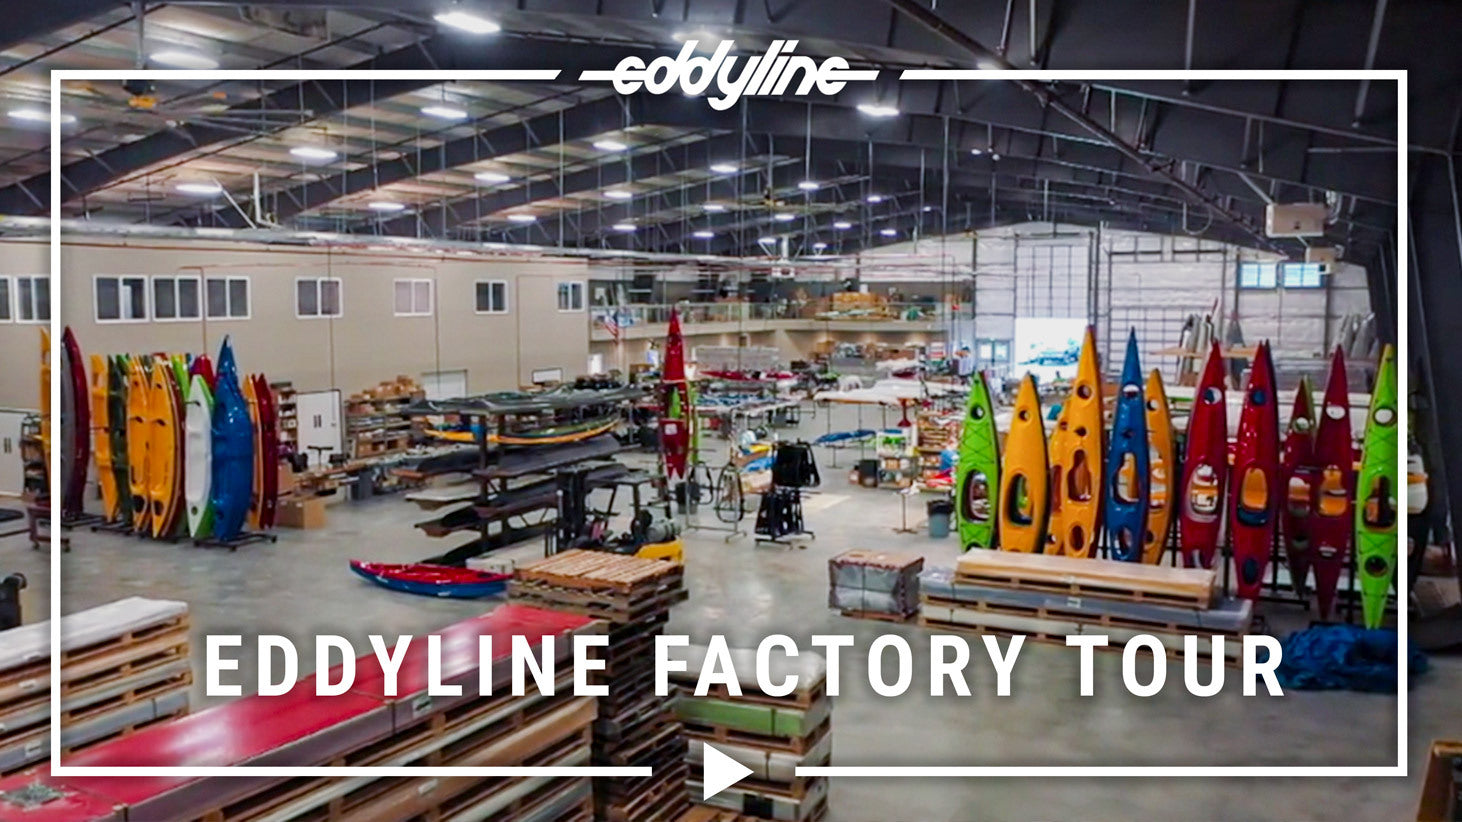 Taking a Tour of the Eddyline Factory